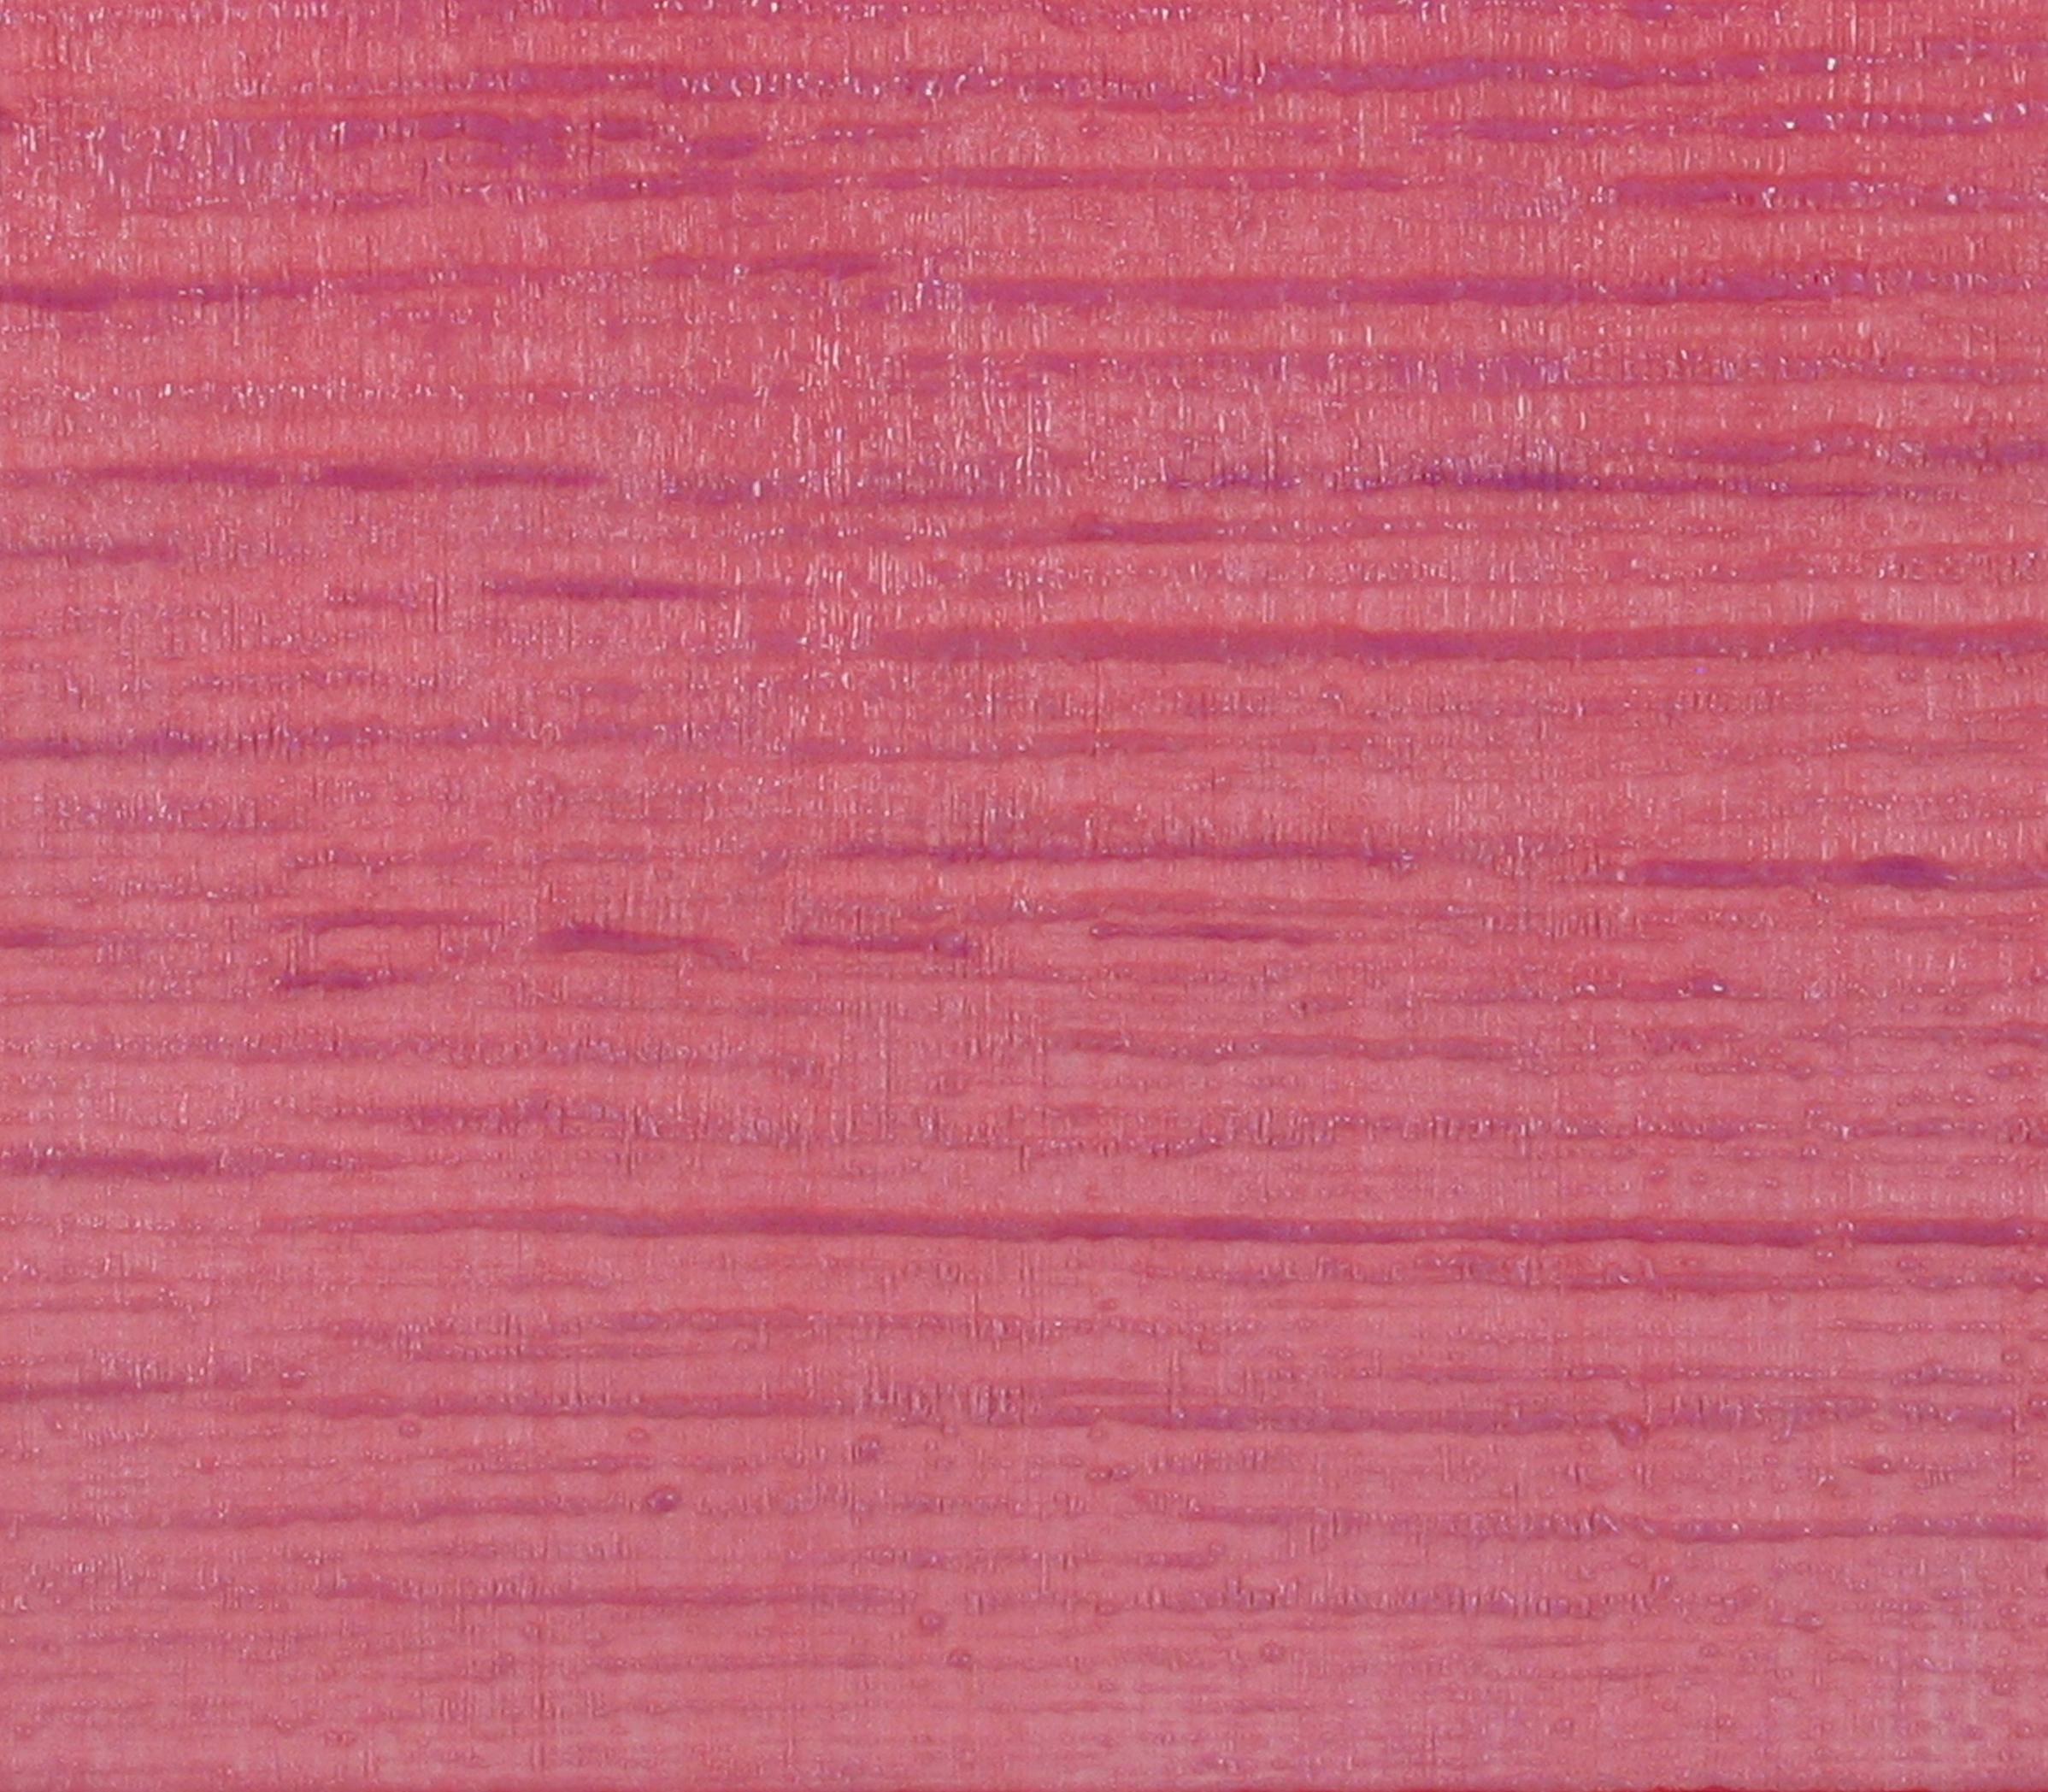 This is a vibrant pink encaustic (pigmented beeswax) painting on birch panel accented with a darker shade of reddish pink along the edge. Signed and titled on verso.

Joanne Mattera’s paintings can be described as lush minimalism, the work is